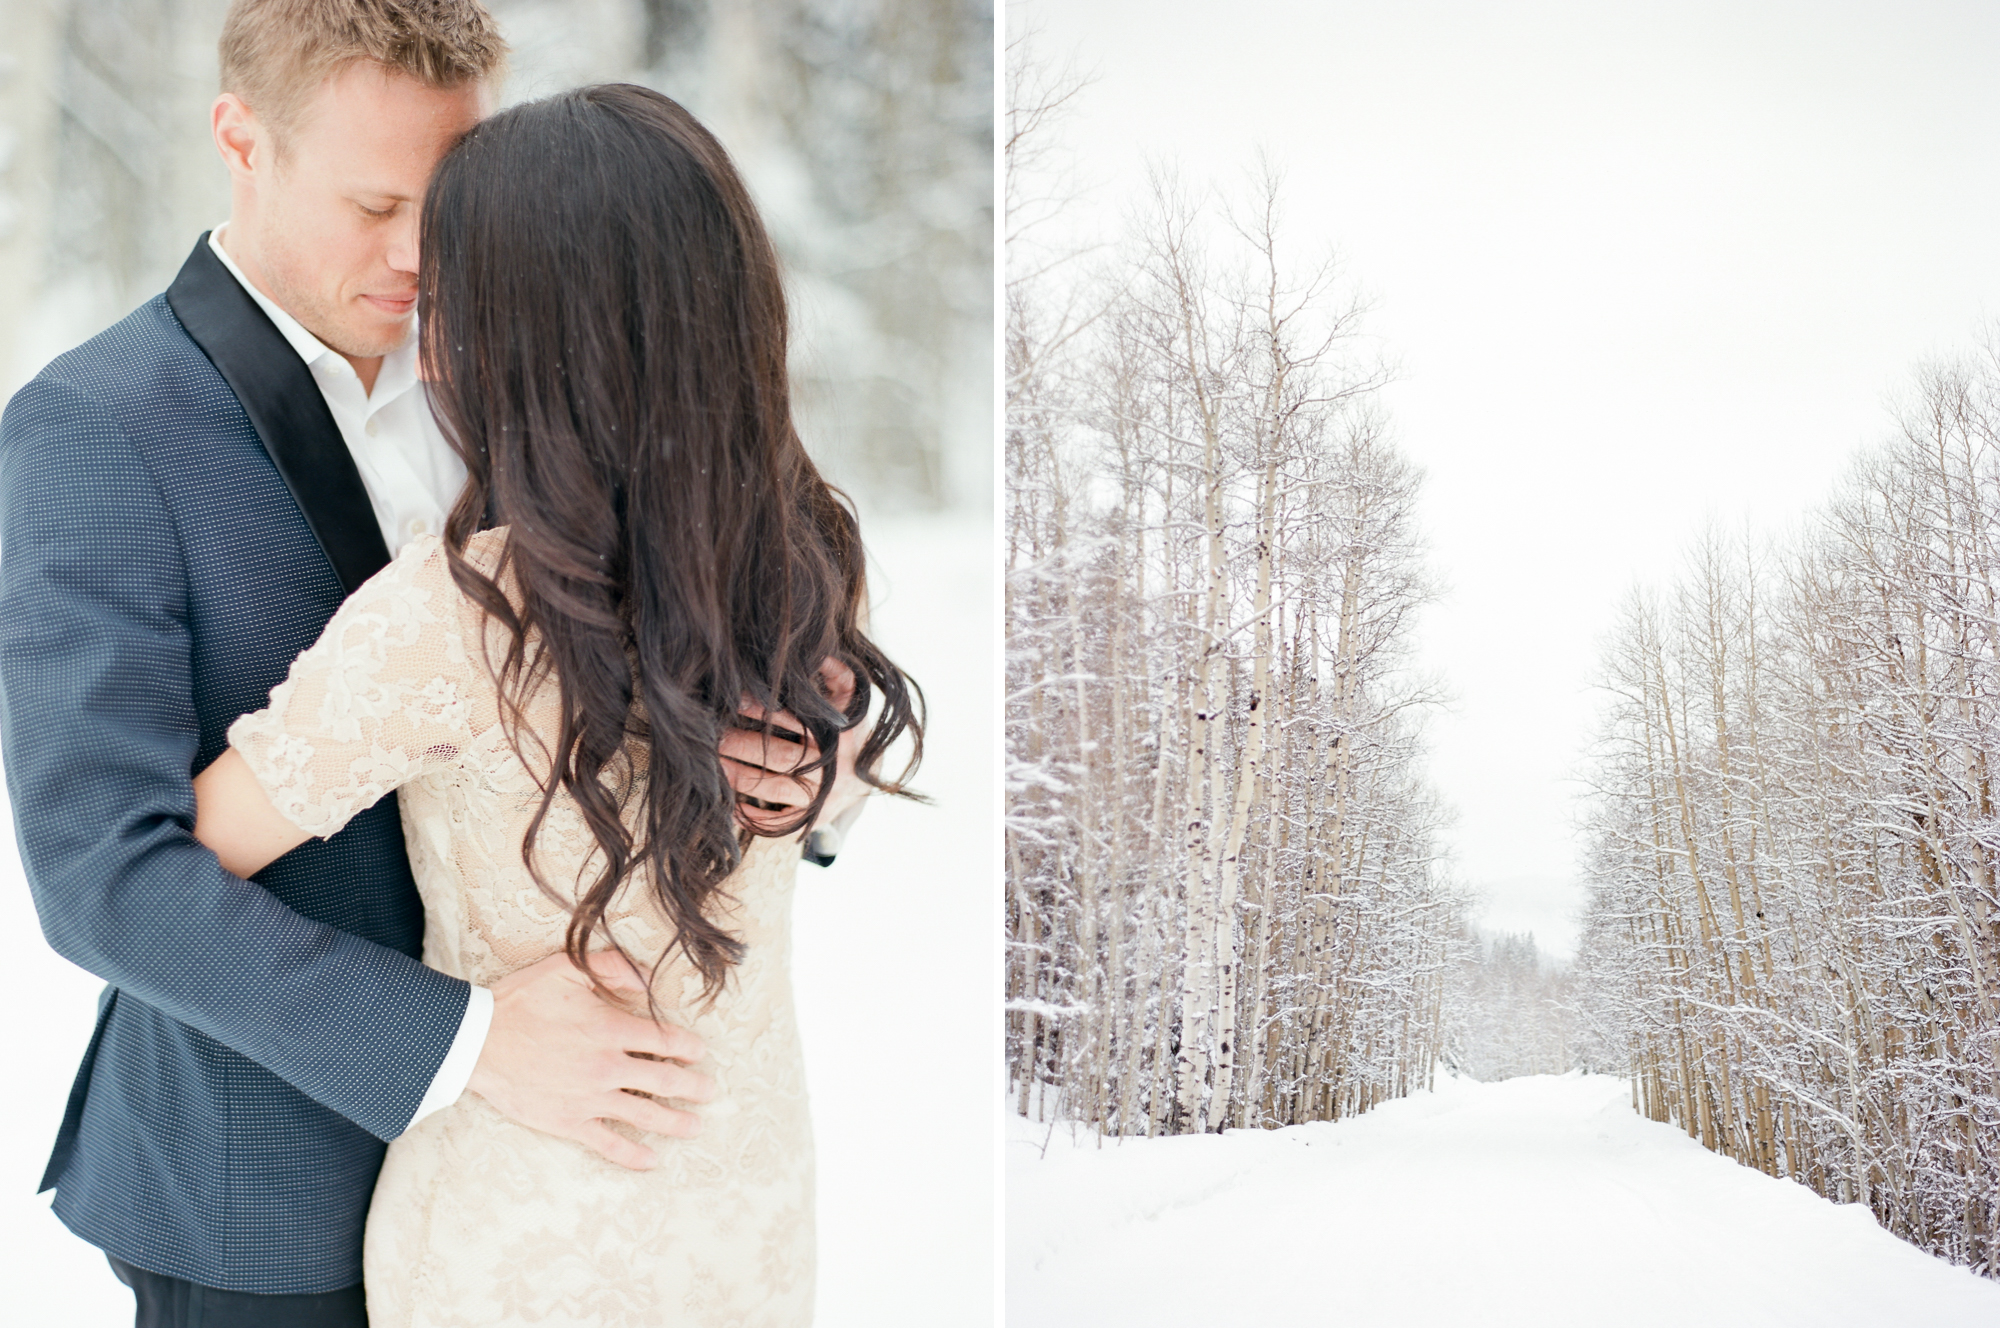 Snowy engagement photos in Colorado. By Rachel Havel